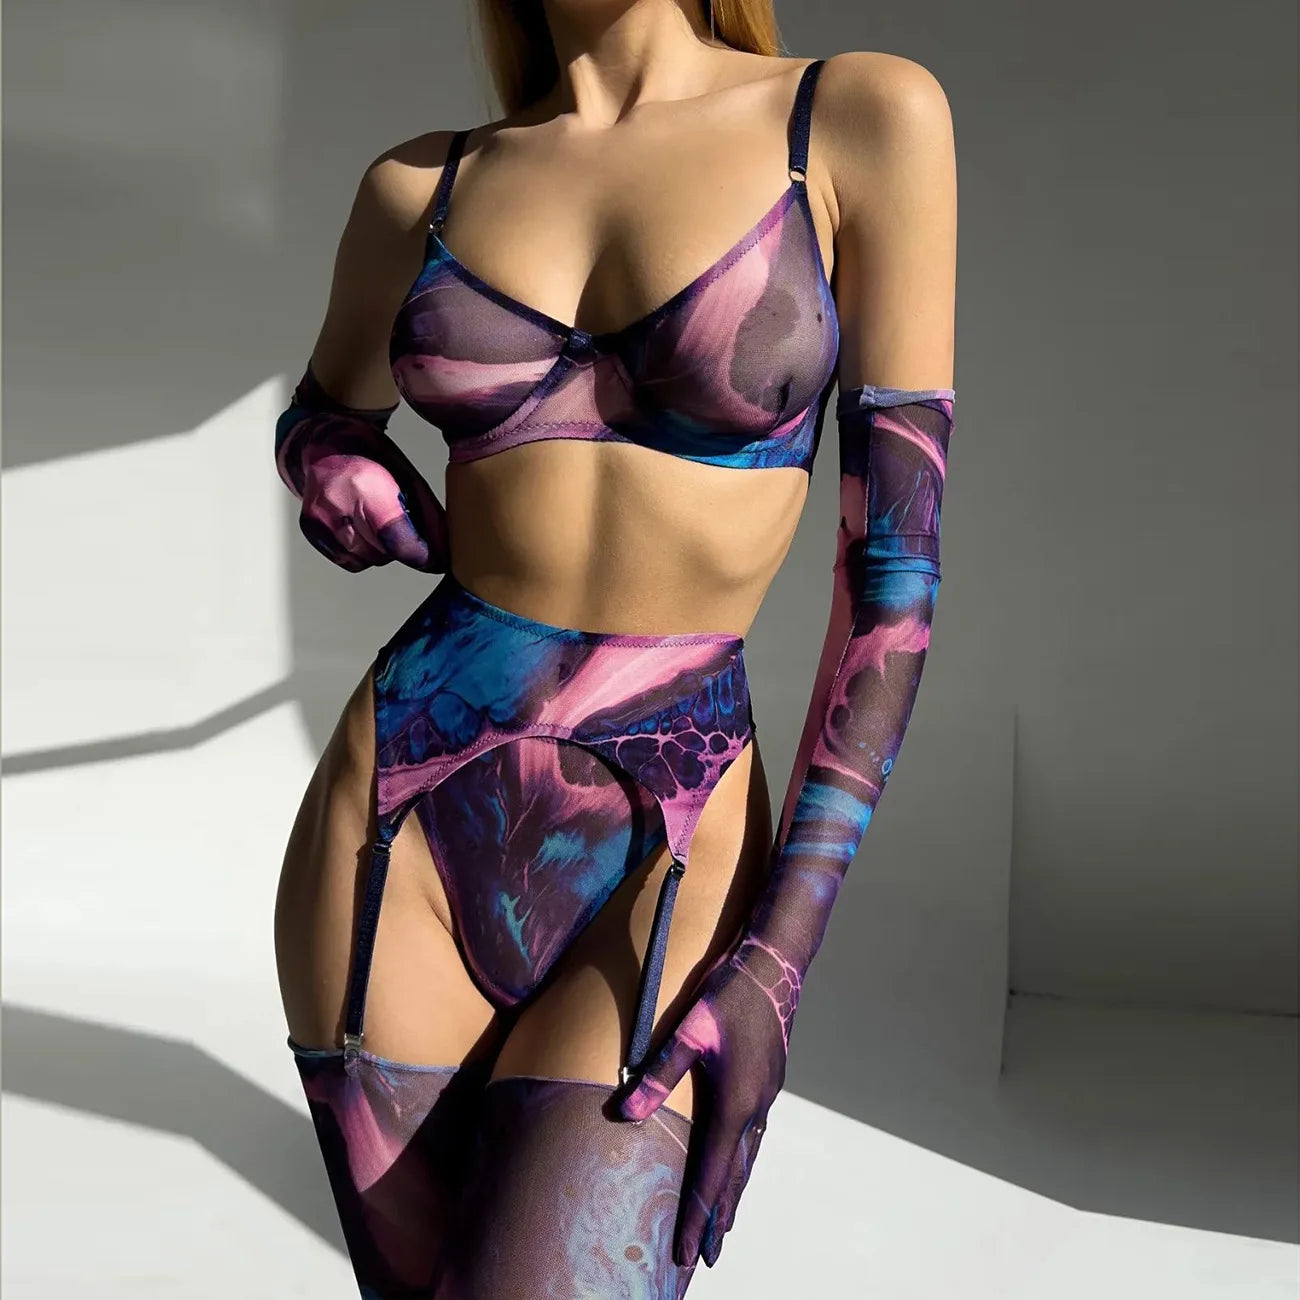  "Futuristic Neon Blue CyberCrime Hentai Attire - Elevate your style with this captivating cyberpunk-inspired ensemble. Perfect for rebels embracing the future. Shop now for a bold statement piece."